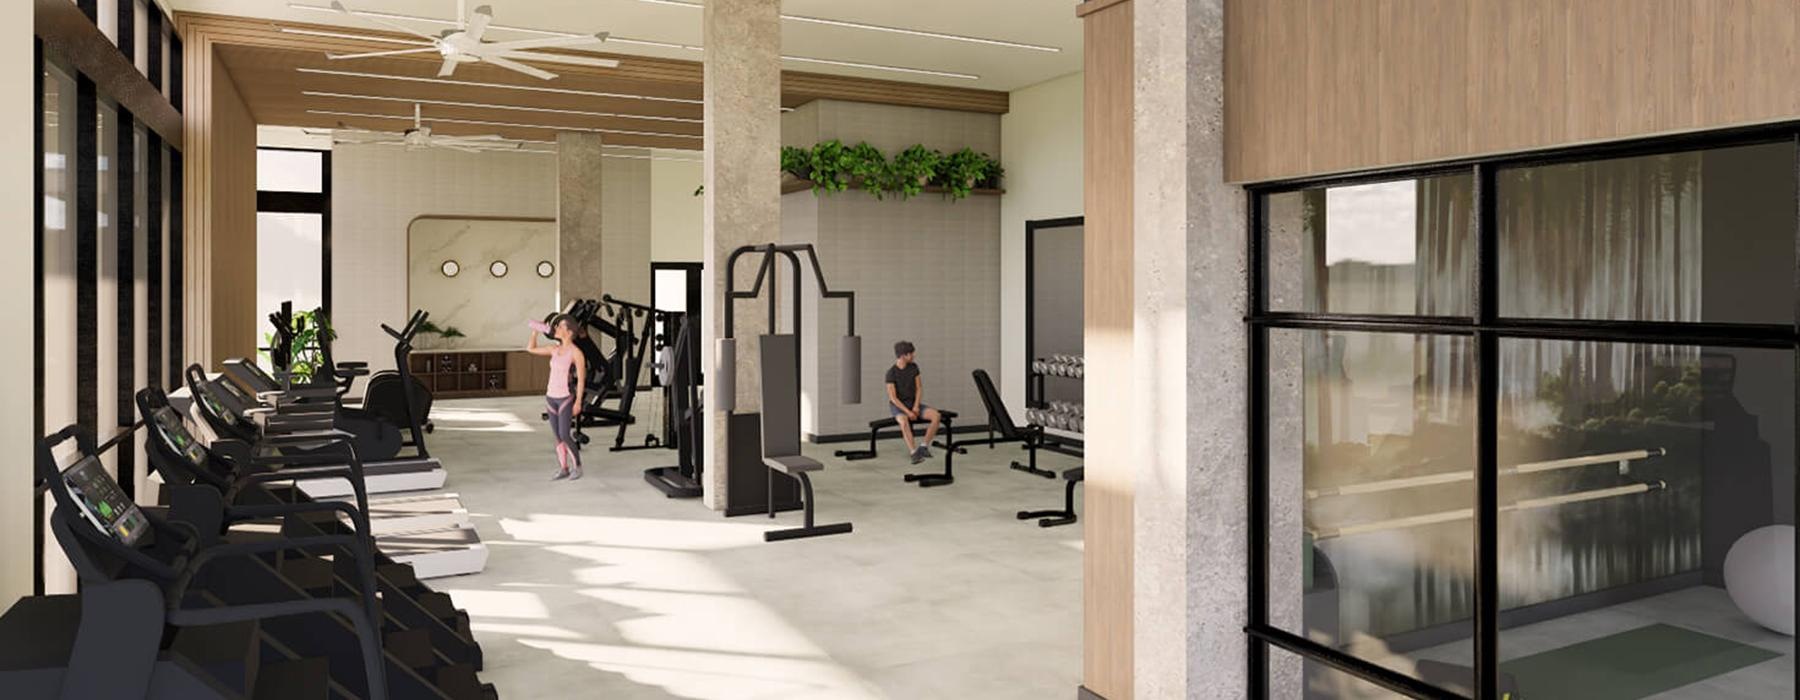 fitness area with modern accents and nearby work-spaces